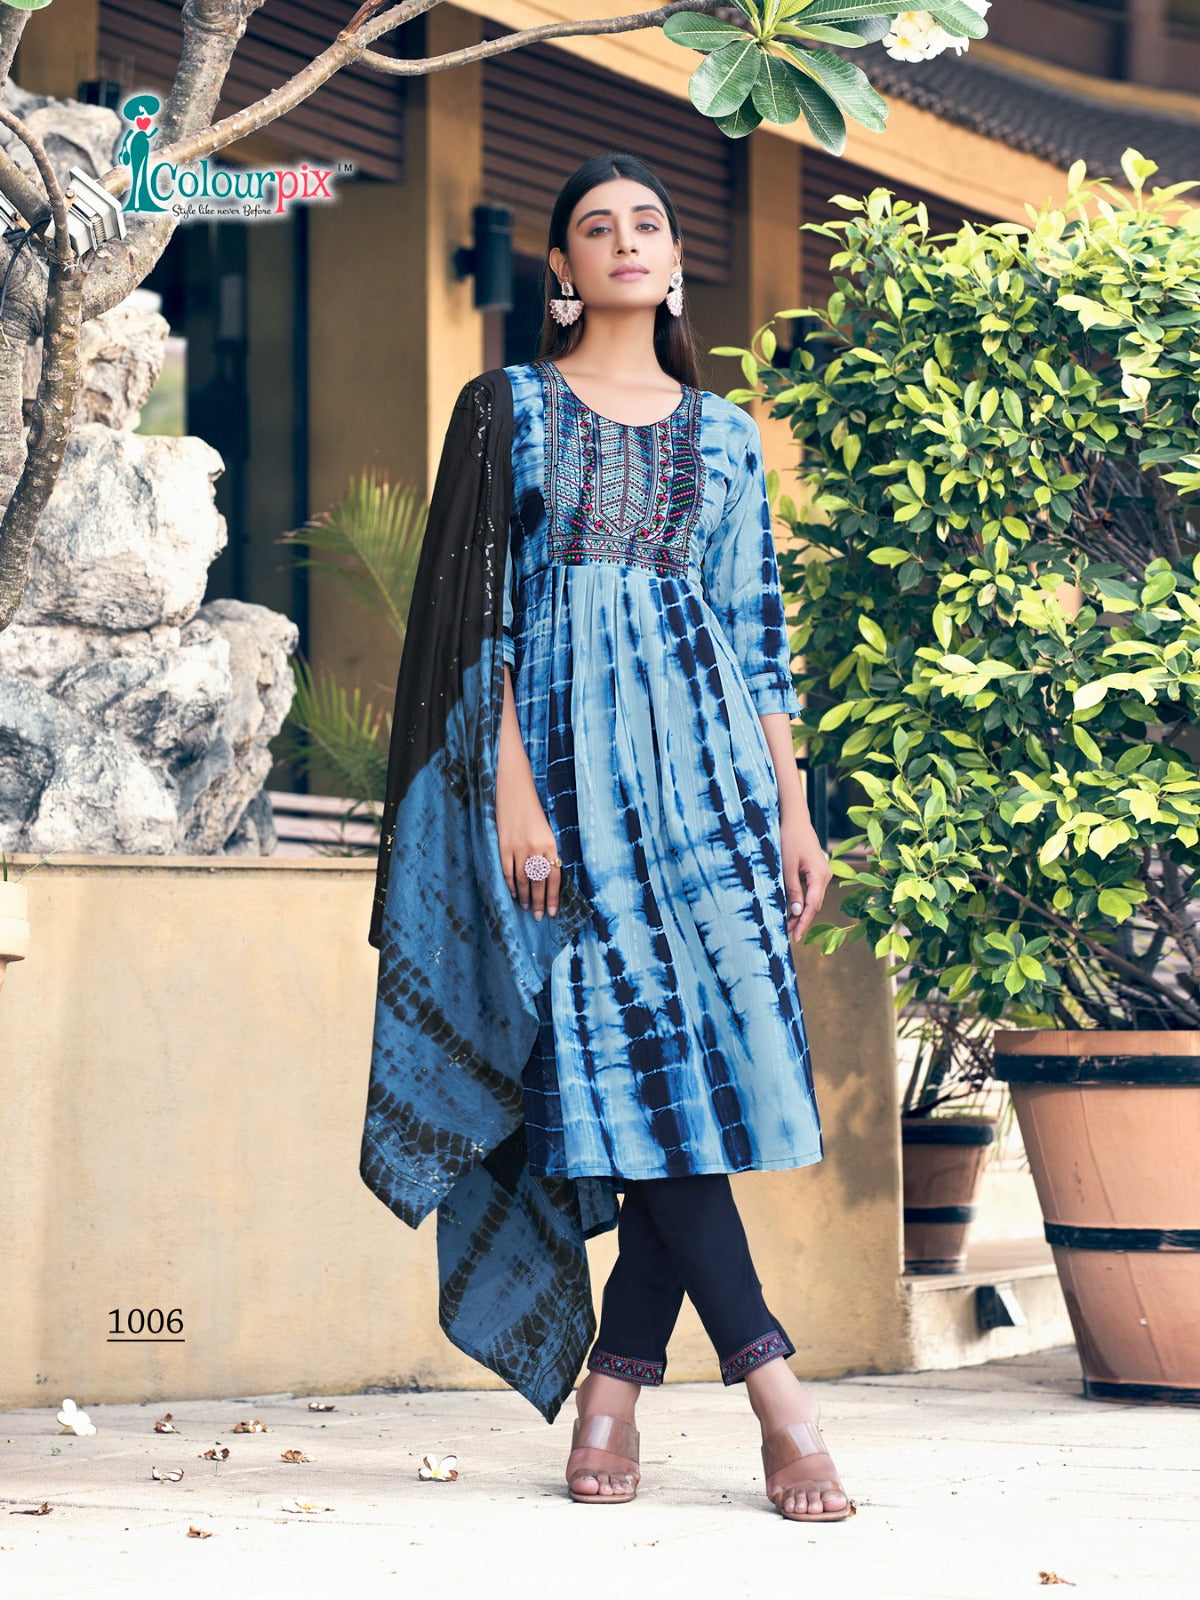 Noor Colour Pix Viscose Readymade Pant Style Suits